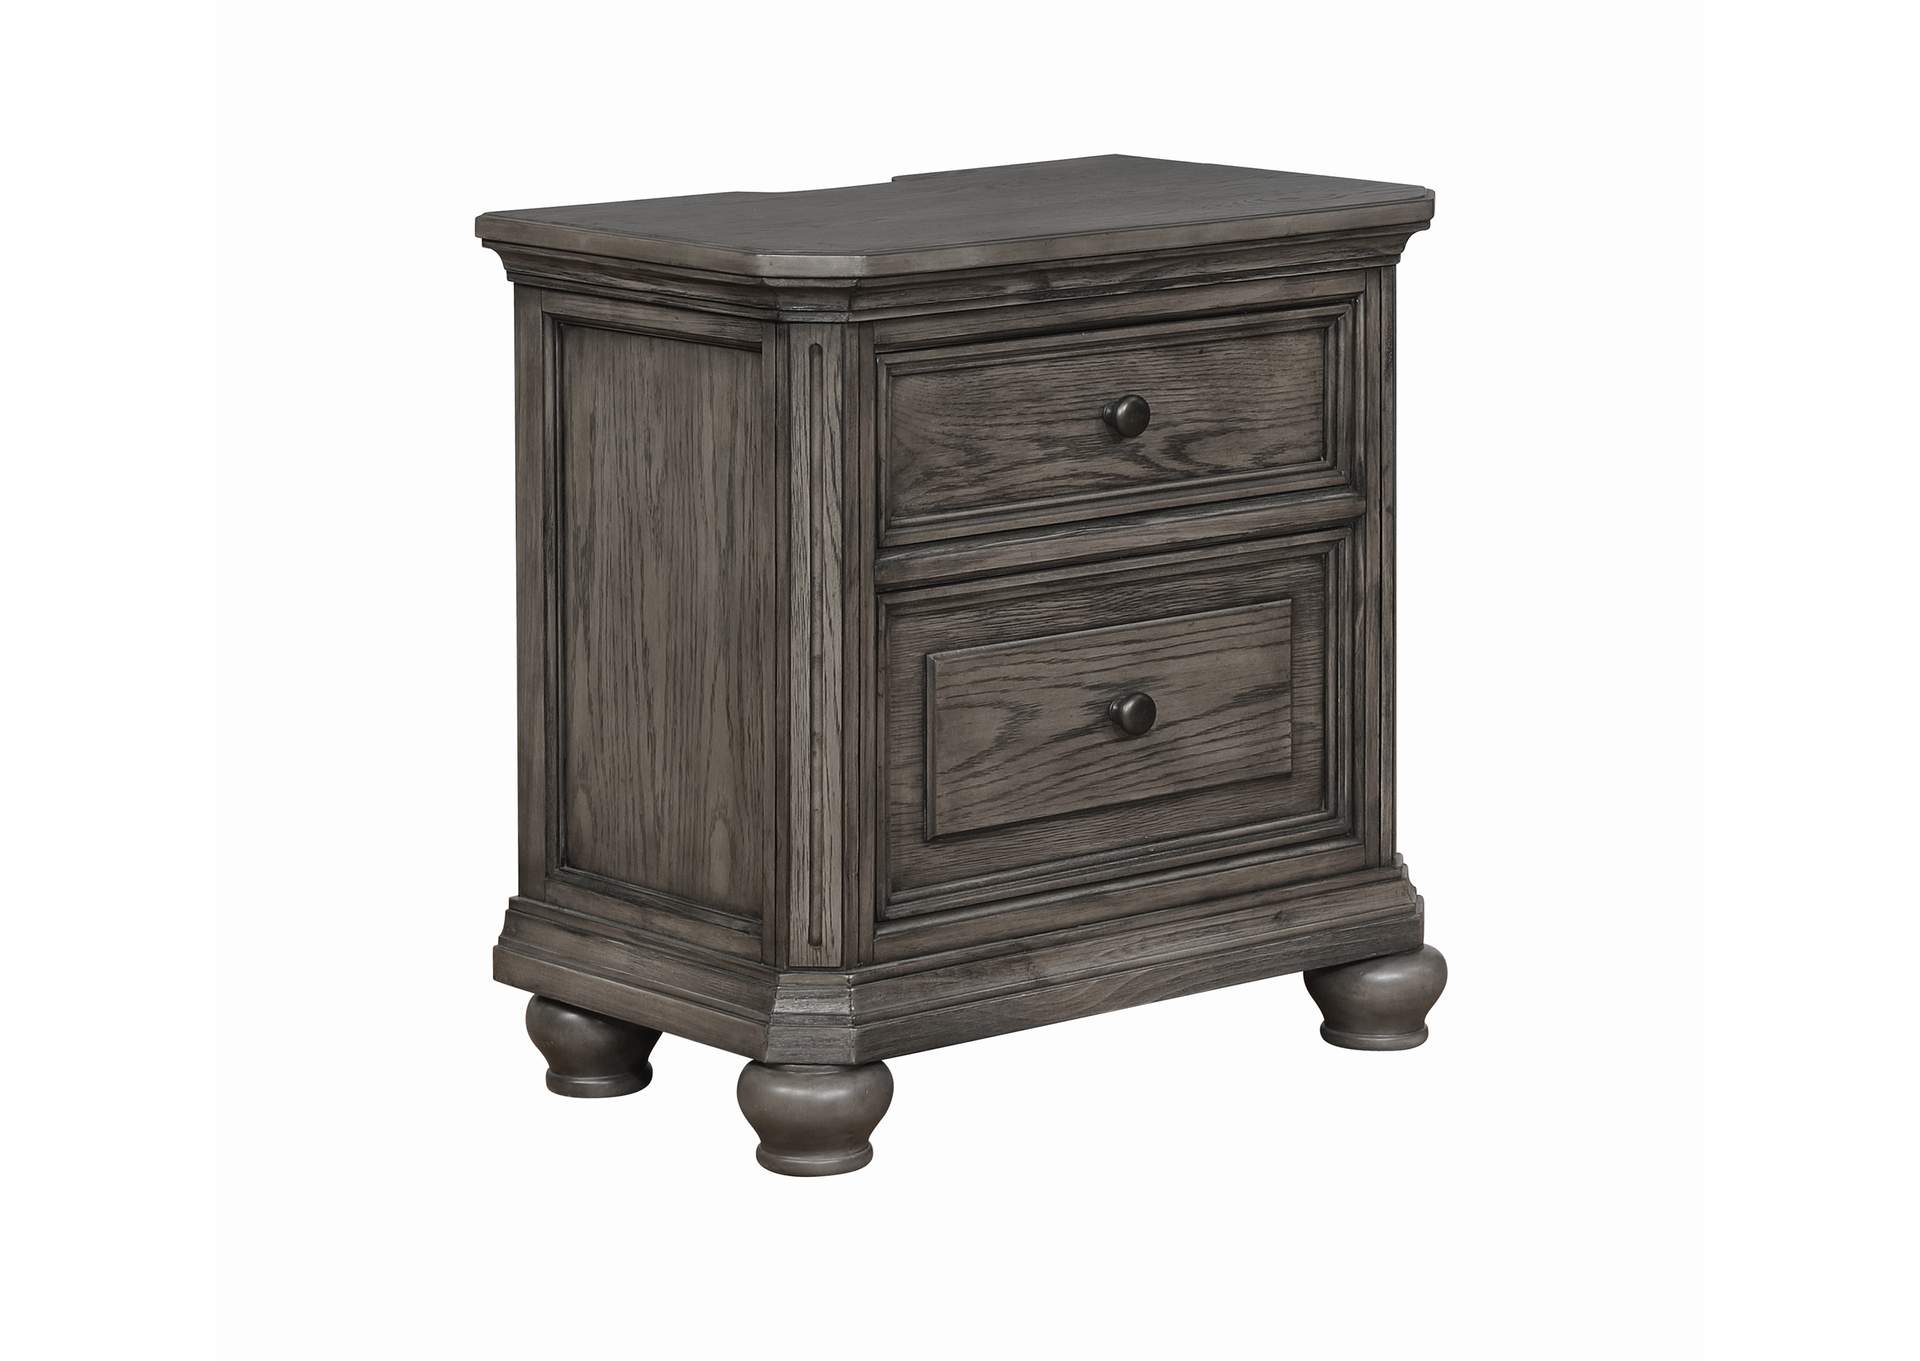 LAVONIA NIGHT STAND W/ USB,Crown Mark